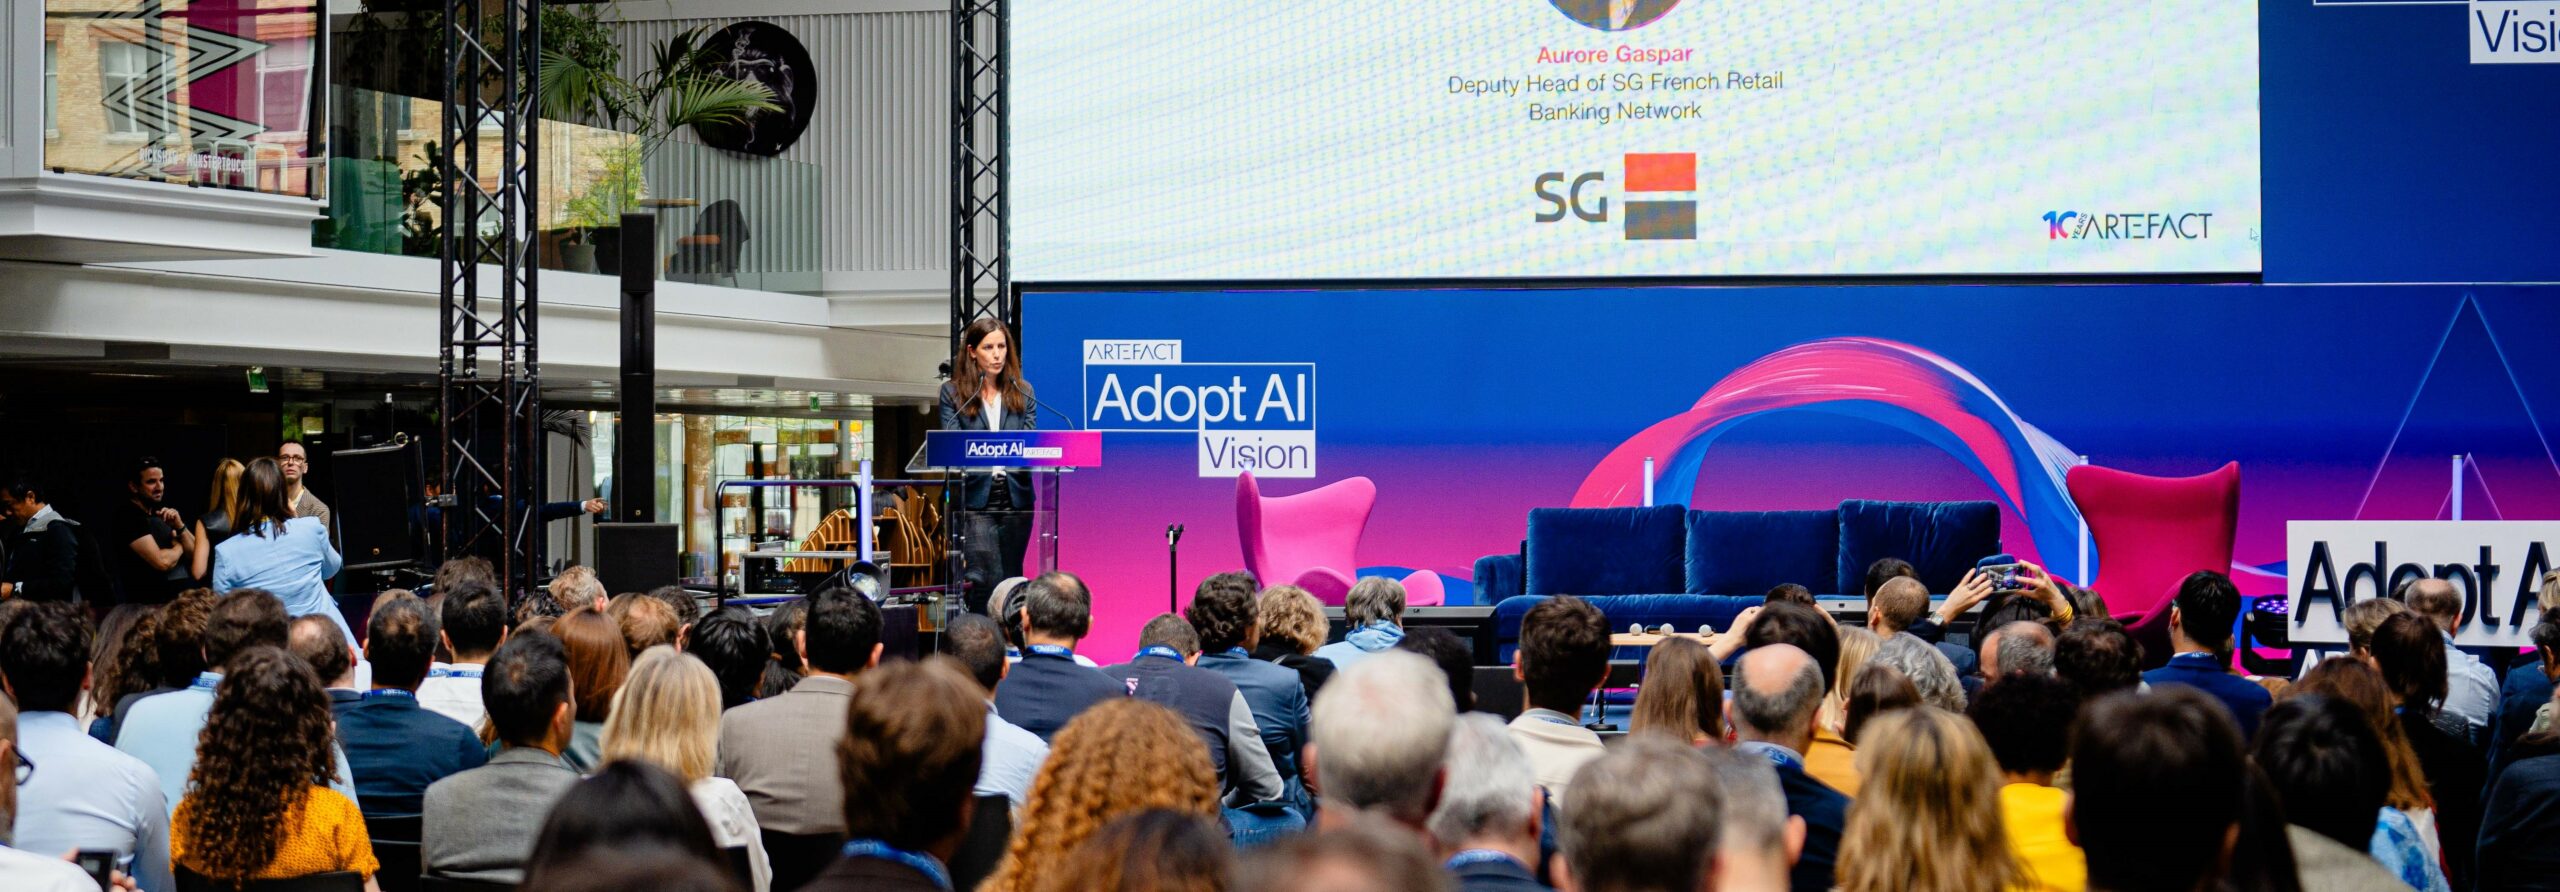 Aurore Gaspar, Deputy Head of SOCIETE GENERALE French retail banking network at the Adopt AI Summit – AI for finance in retail bank